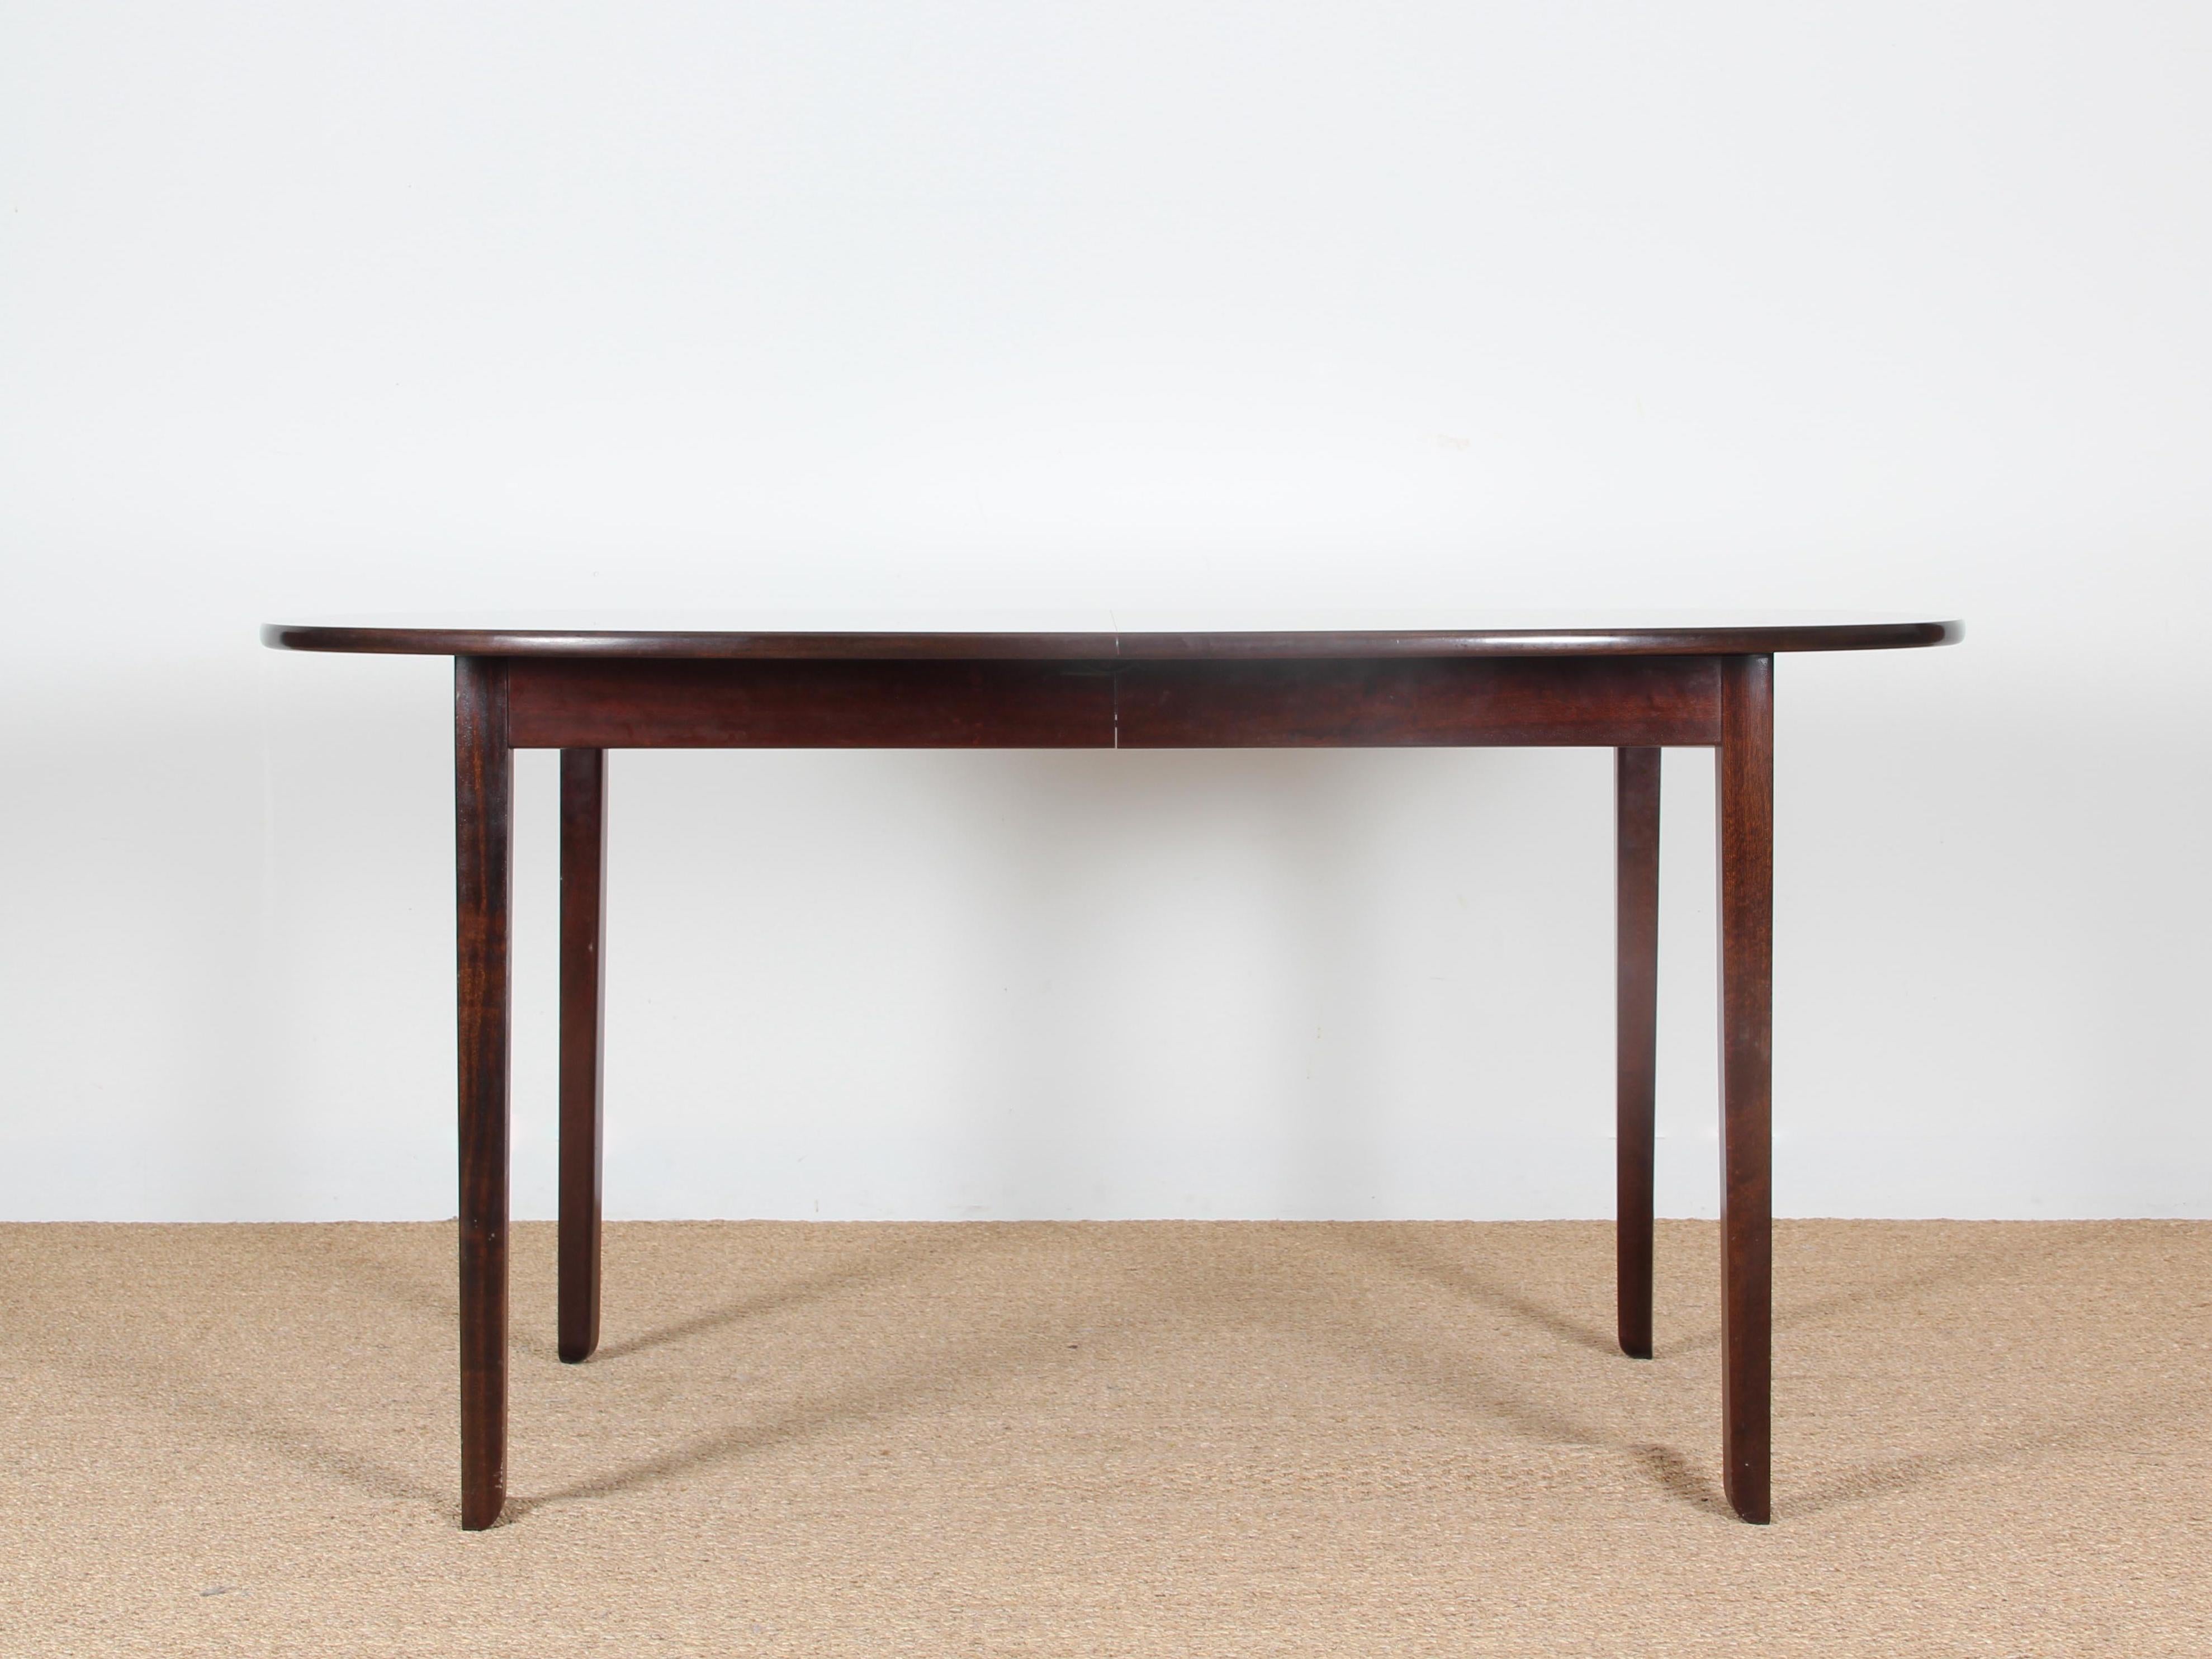 Mid-Century Modern scandinavian dining table in mahogany 4/10 seats by Ole Wanscher. 2 extra leaves. Excellent condition. Glossy finish.

Measures: H 73 cm. W 148 cm. D 108 cm. Extra leaves W : 65 cm. W max : 278 cm.